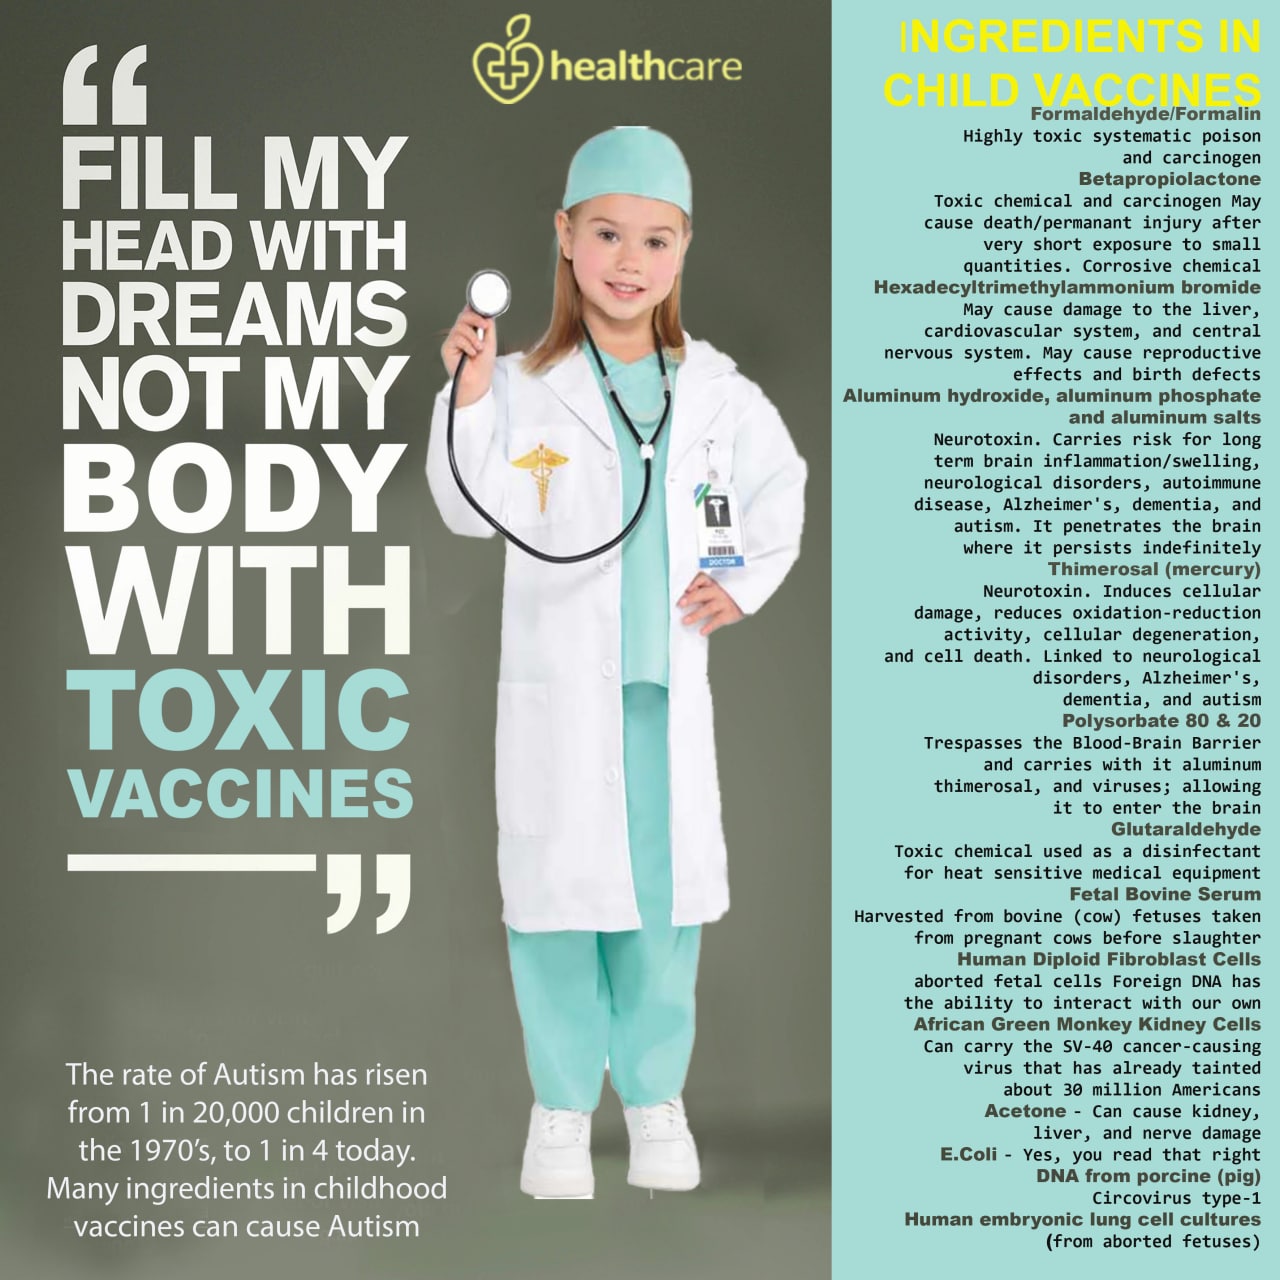 Inhaltsstoffe
                  Kinderimpfung "USA" 31.10.2022: Haufenweise
                  hochgiftige Stoffe: WHAT IS REALLY IN THE C19
                  VACCINES?